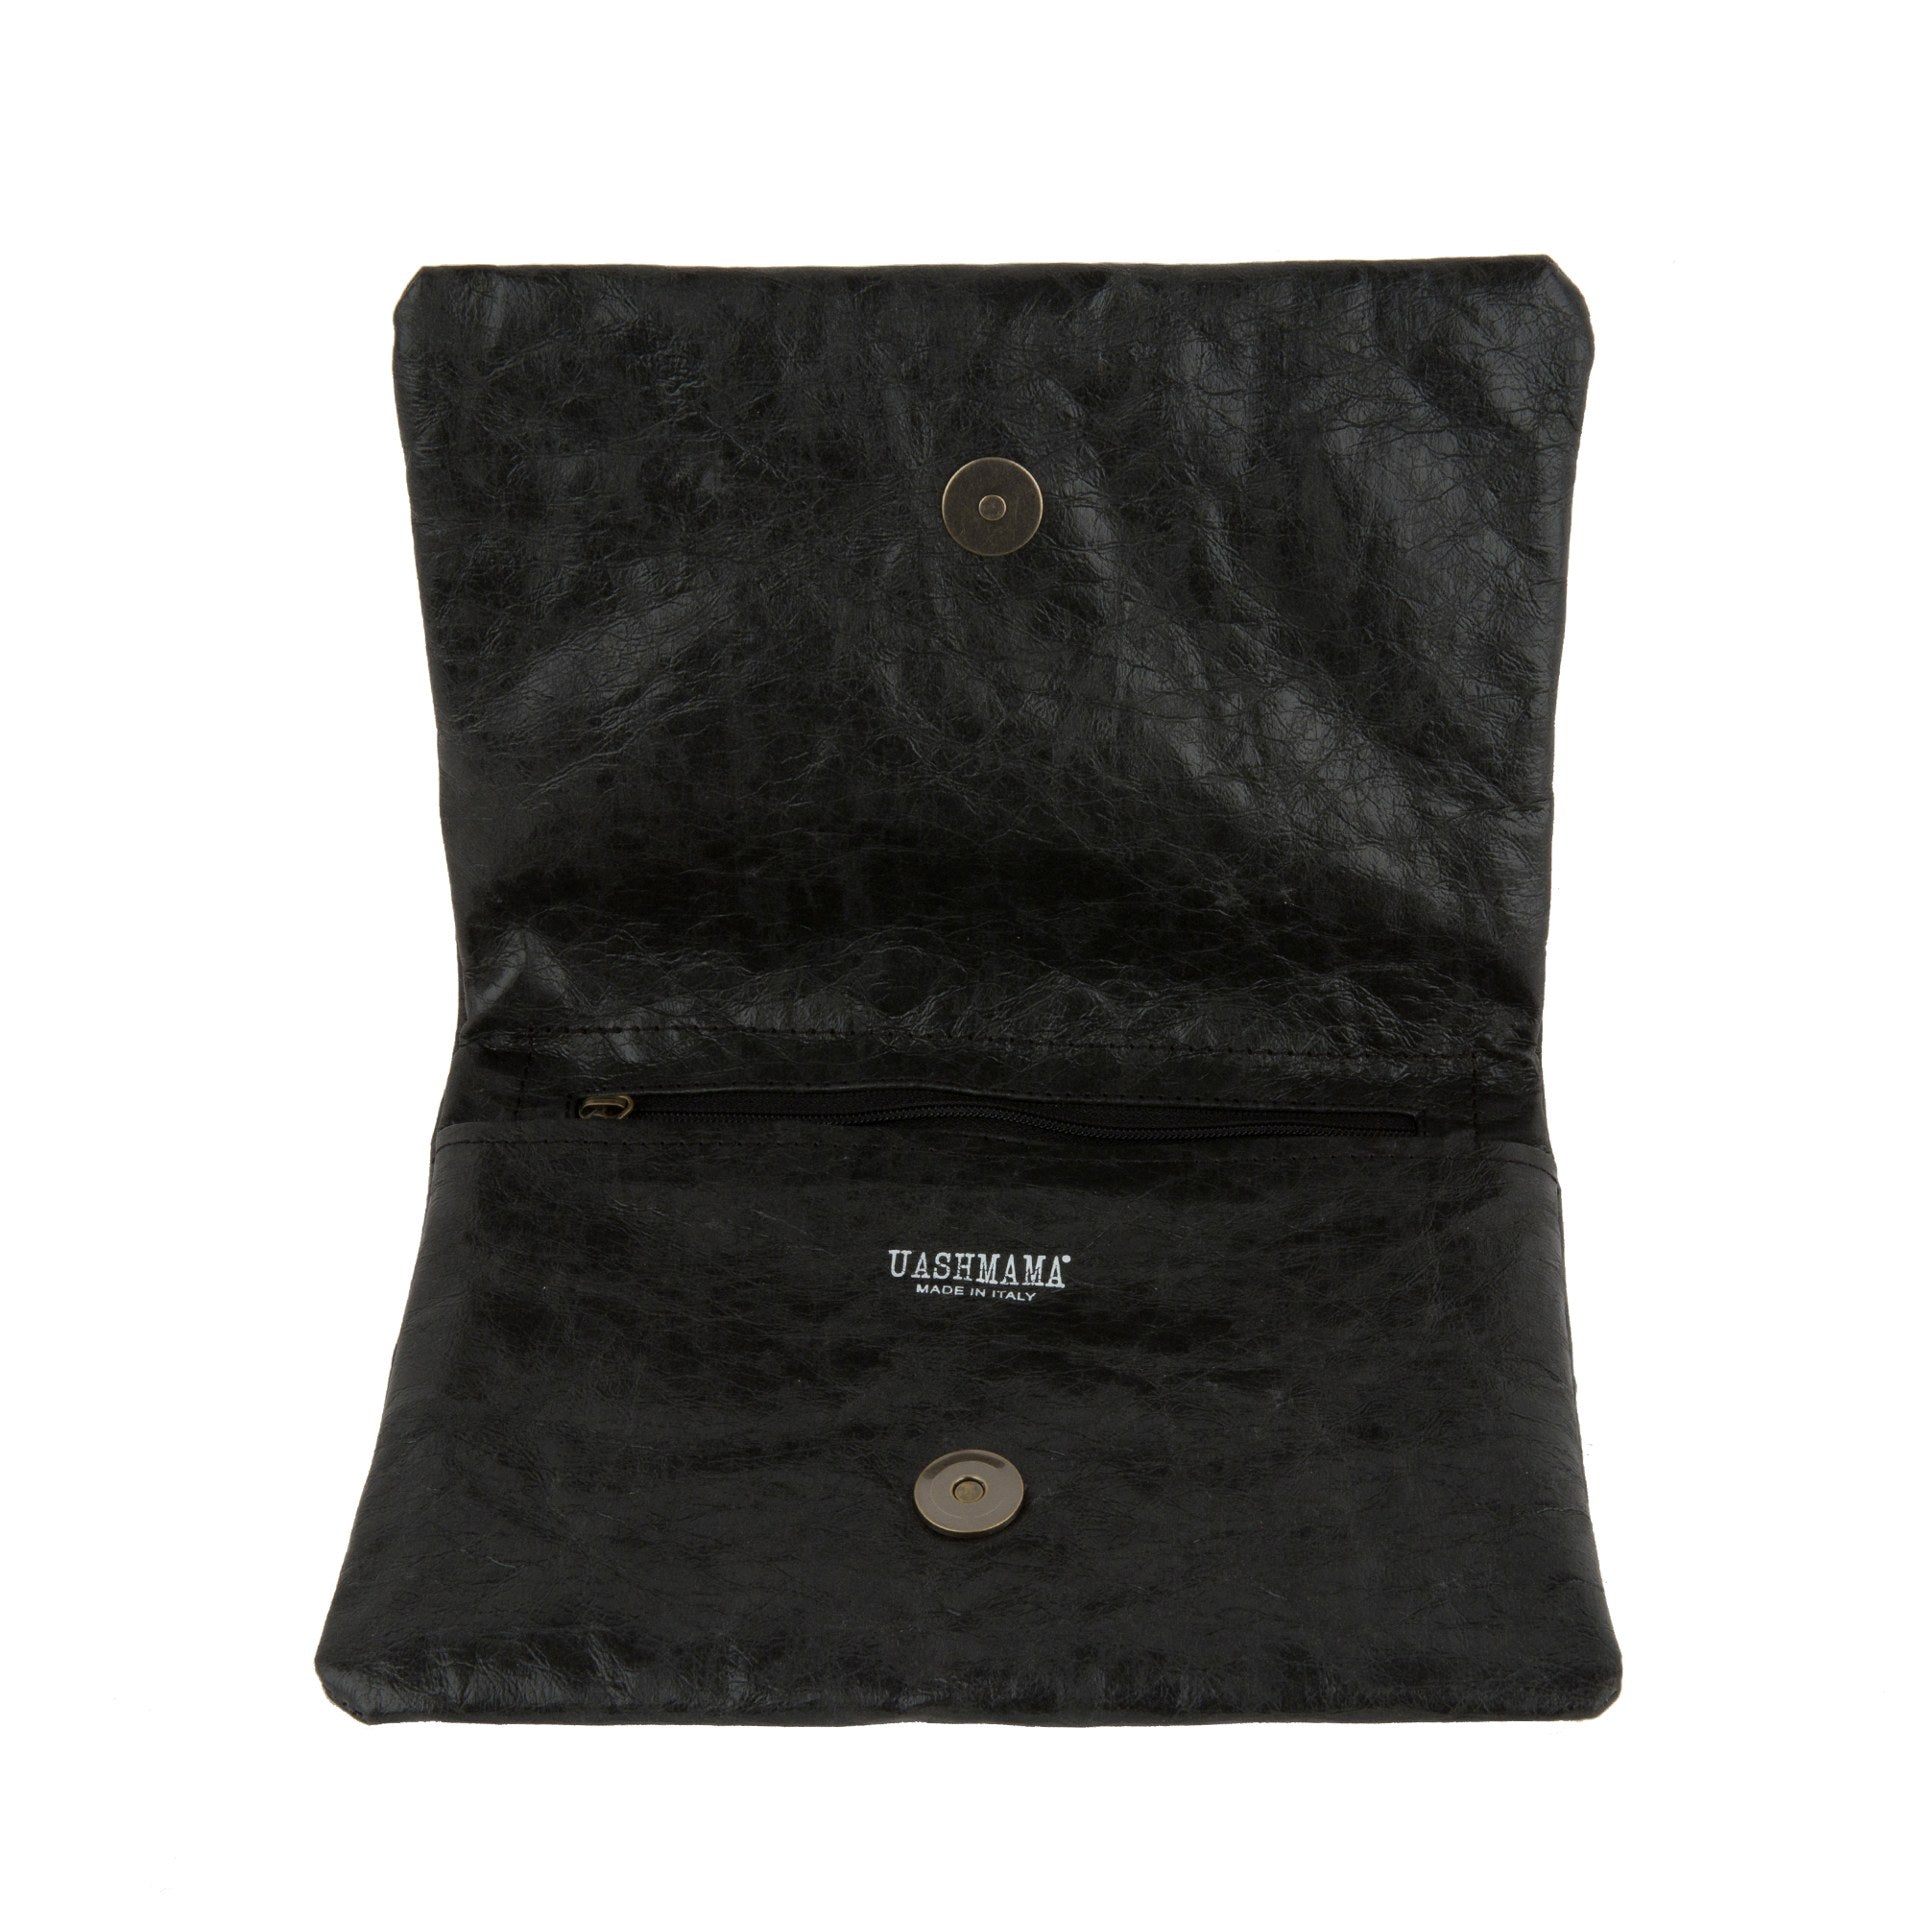 A black washable paper folding clutch is shown open, displaying a metal popper closure and a UASHMAMA stamp in white.